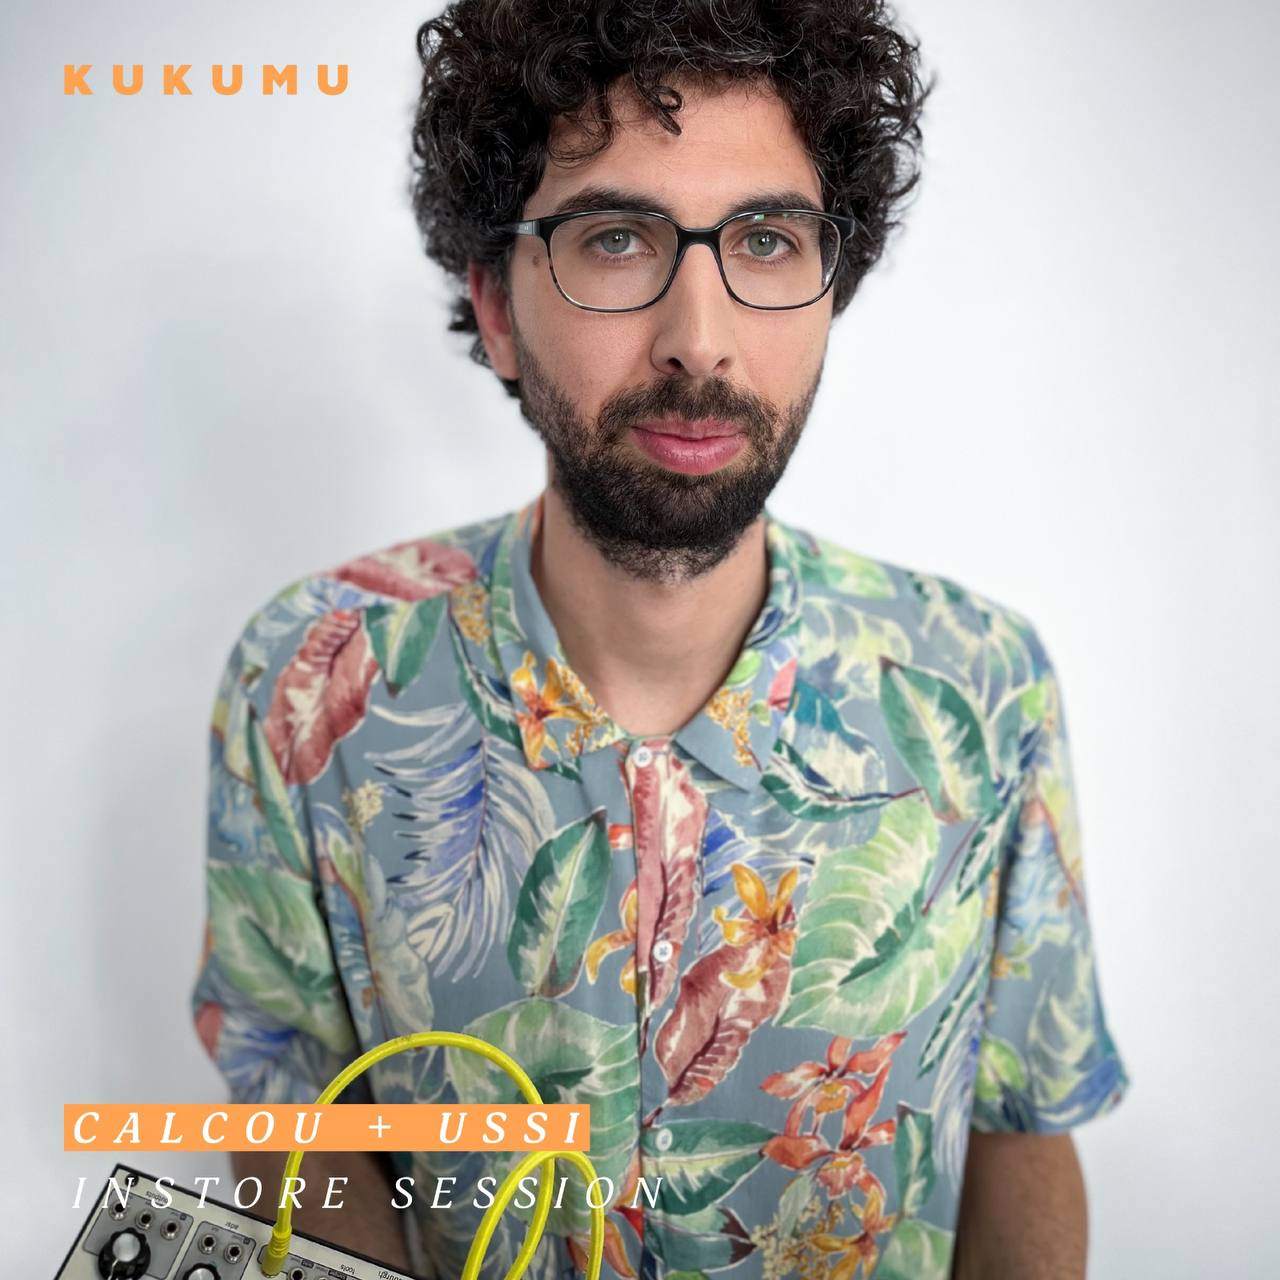 Kukumu InStore Session with Calcou live & Ussi - Página frontal